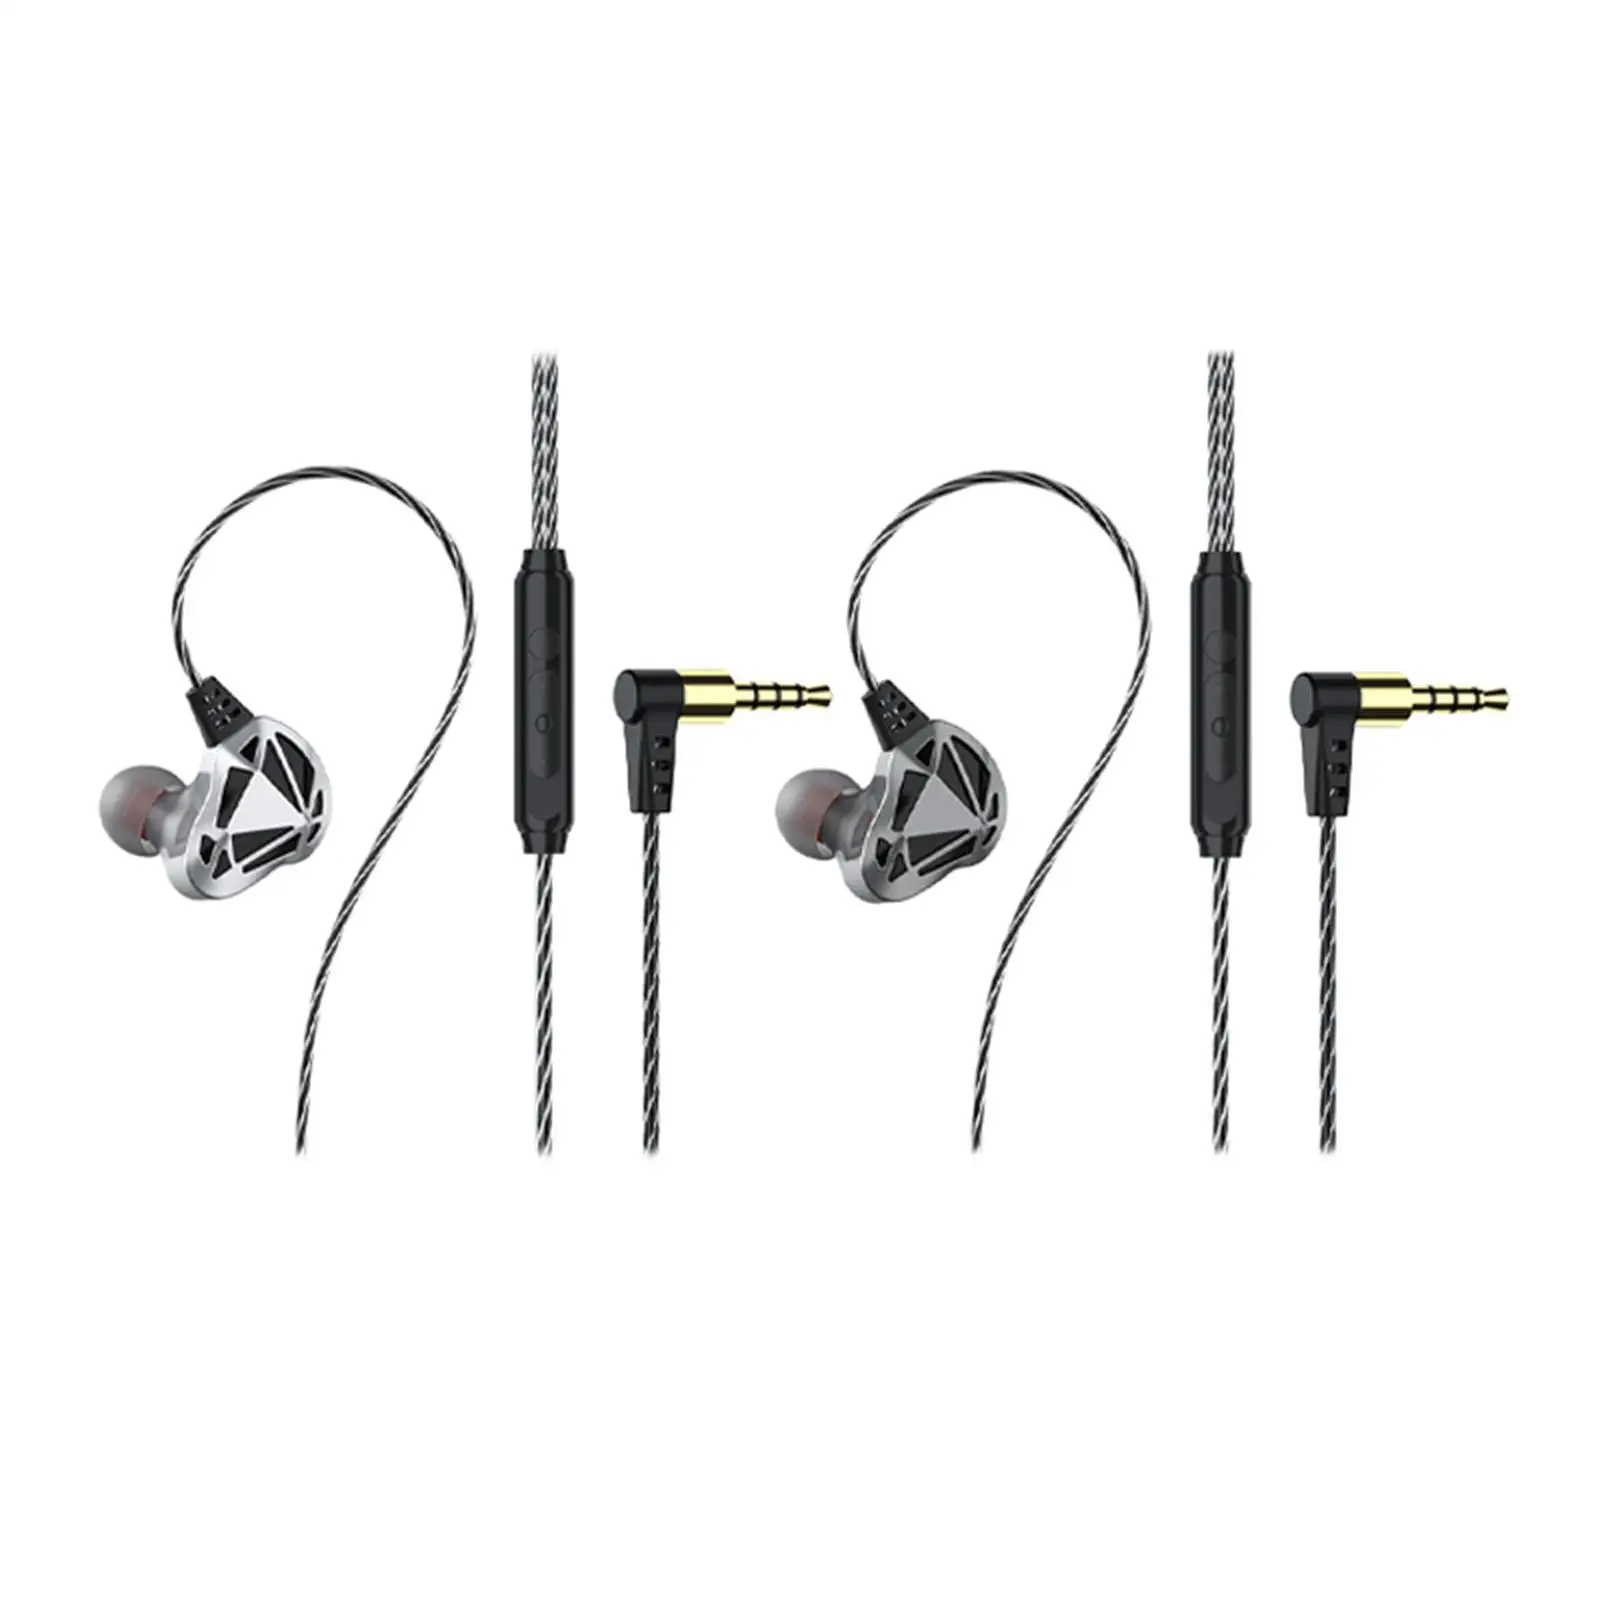 in Ear Headphone Wired 3.5mm Plug Jack Noise Isolation Sports Earbuds for Workout